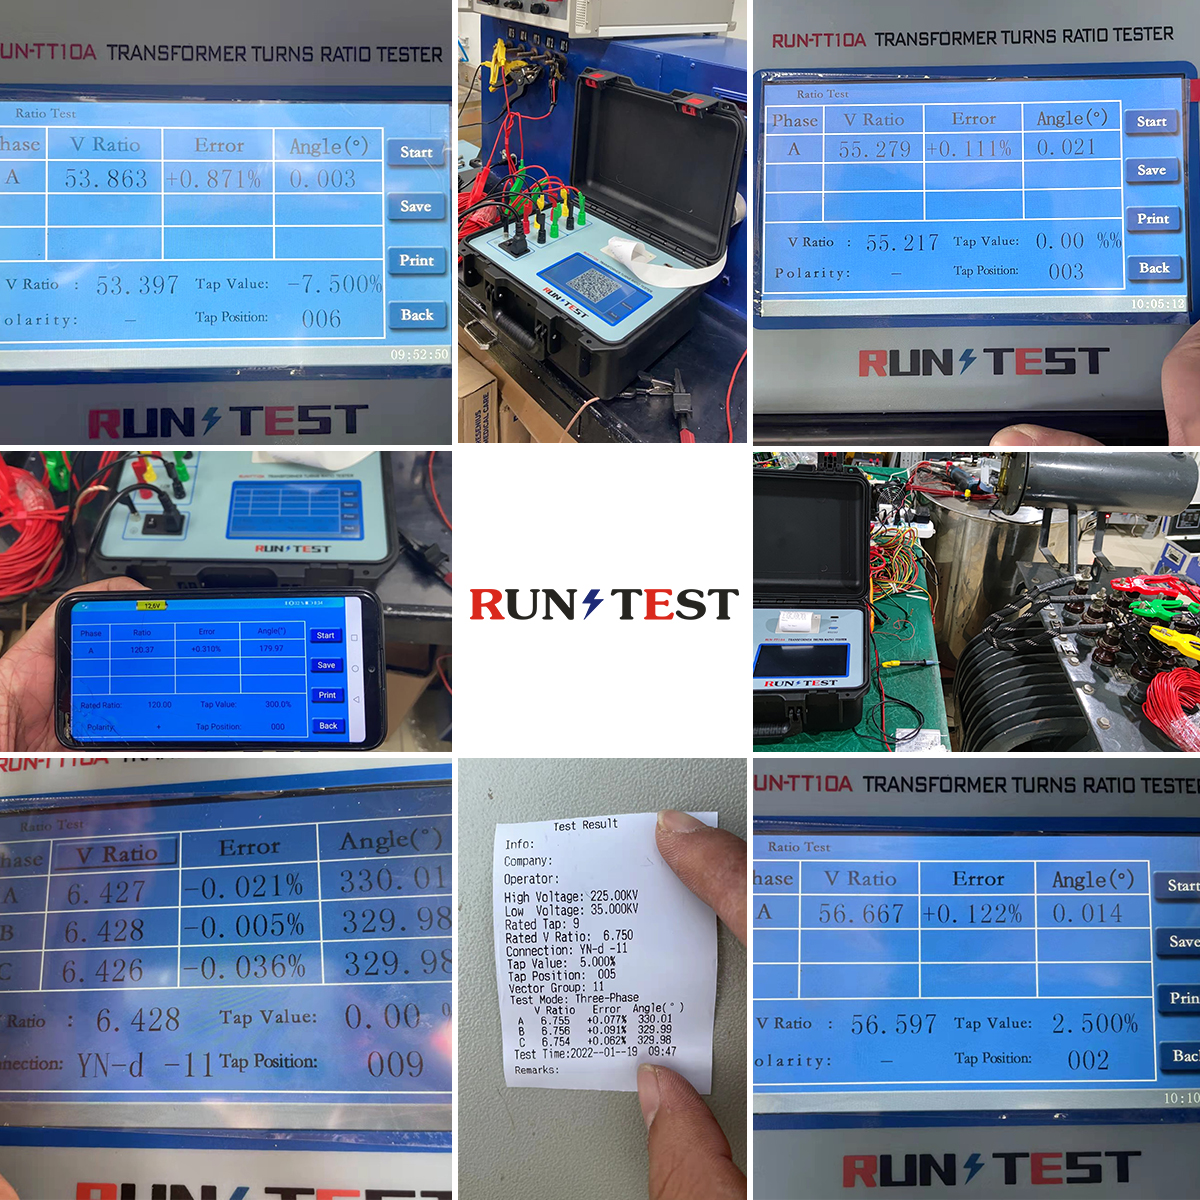 https://www.voltage-tester.com/portable-automatic-transformer-dc-winding-resistance-turns-ratio-tester-ttr-meter-product/